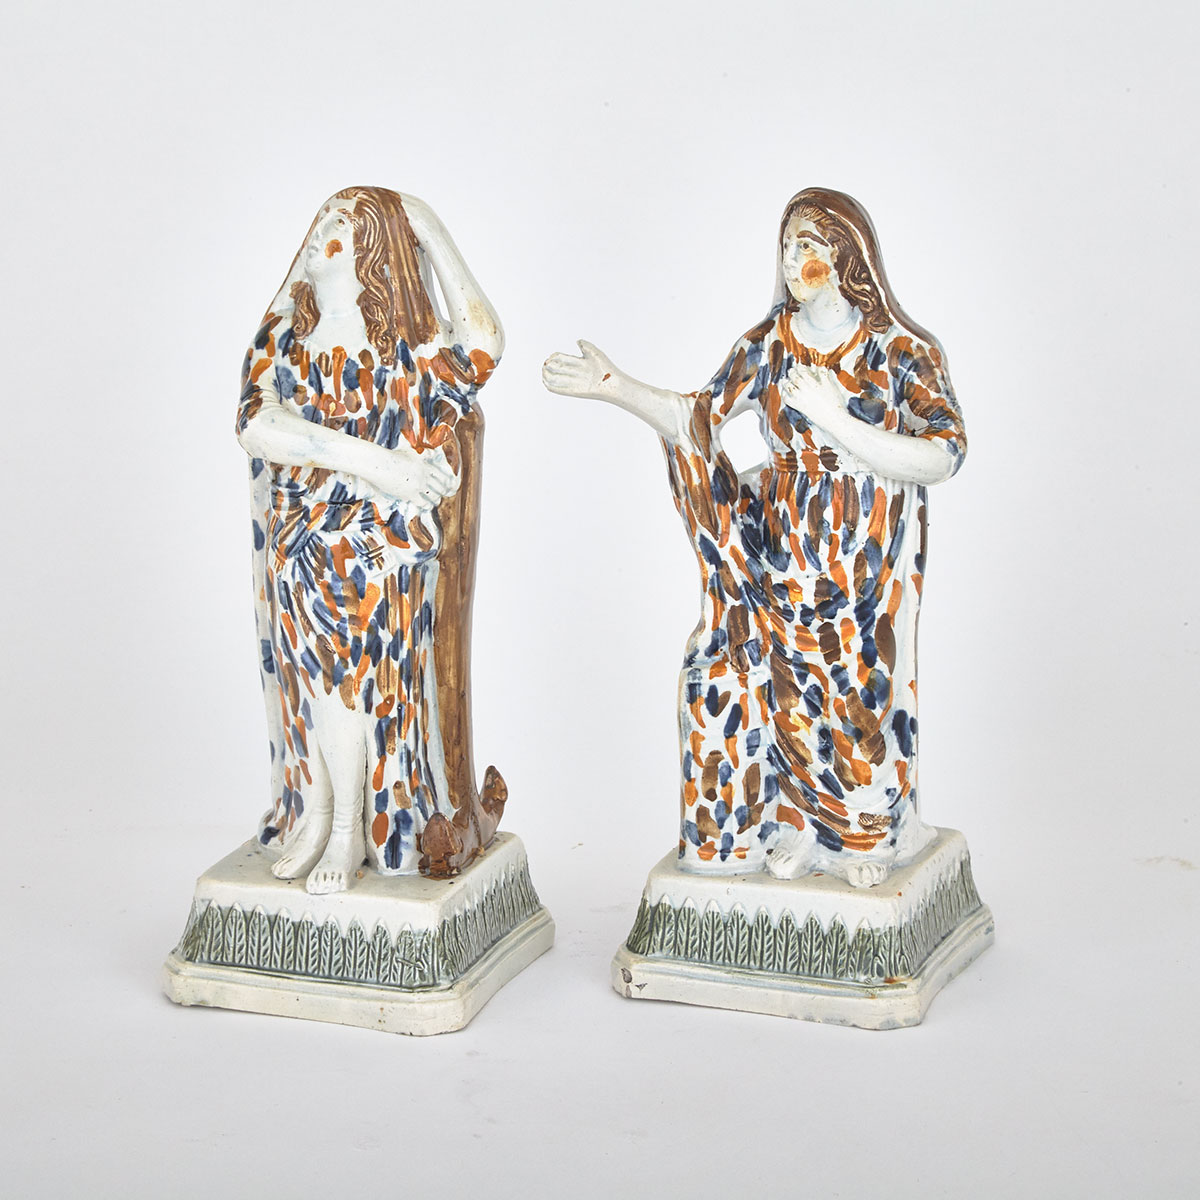 Pair of Pearlware Figures of Faith and Hope, c.1800